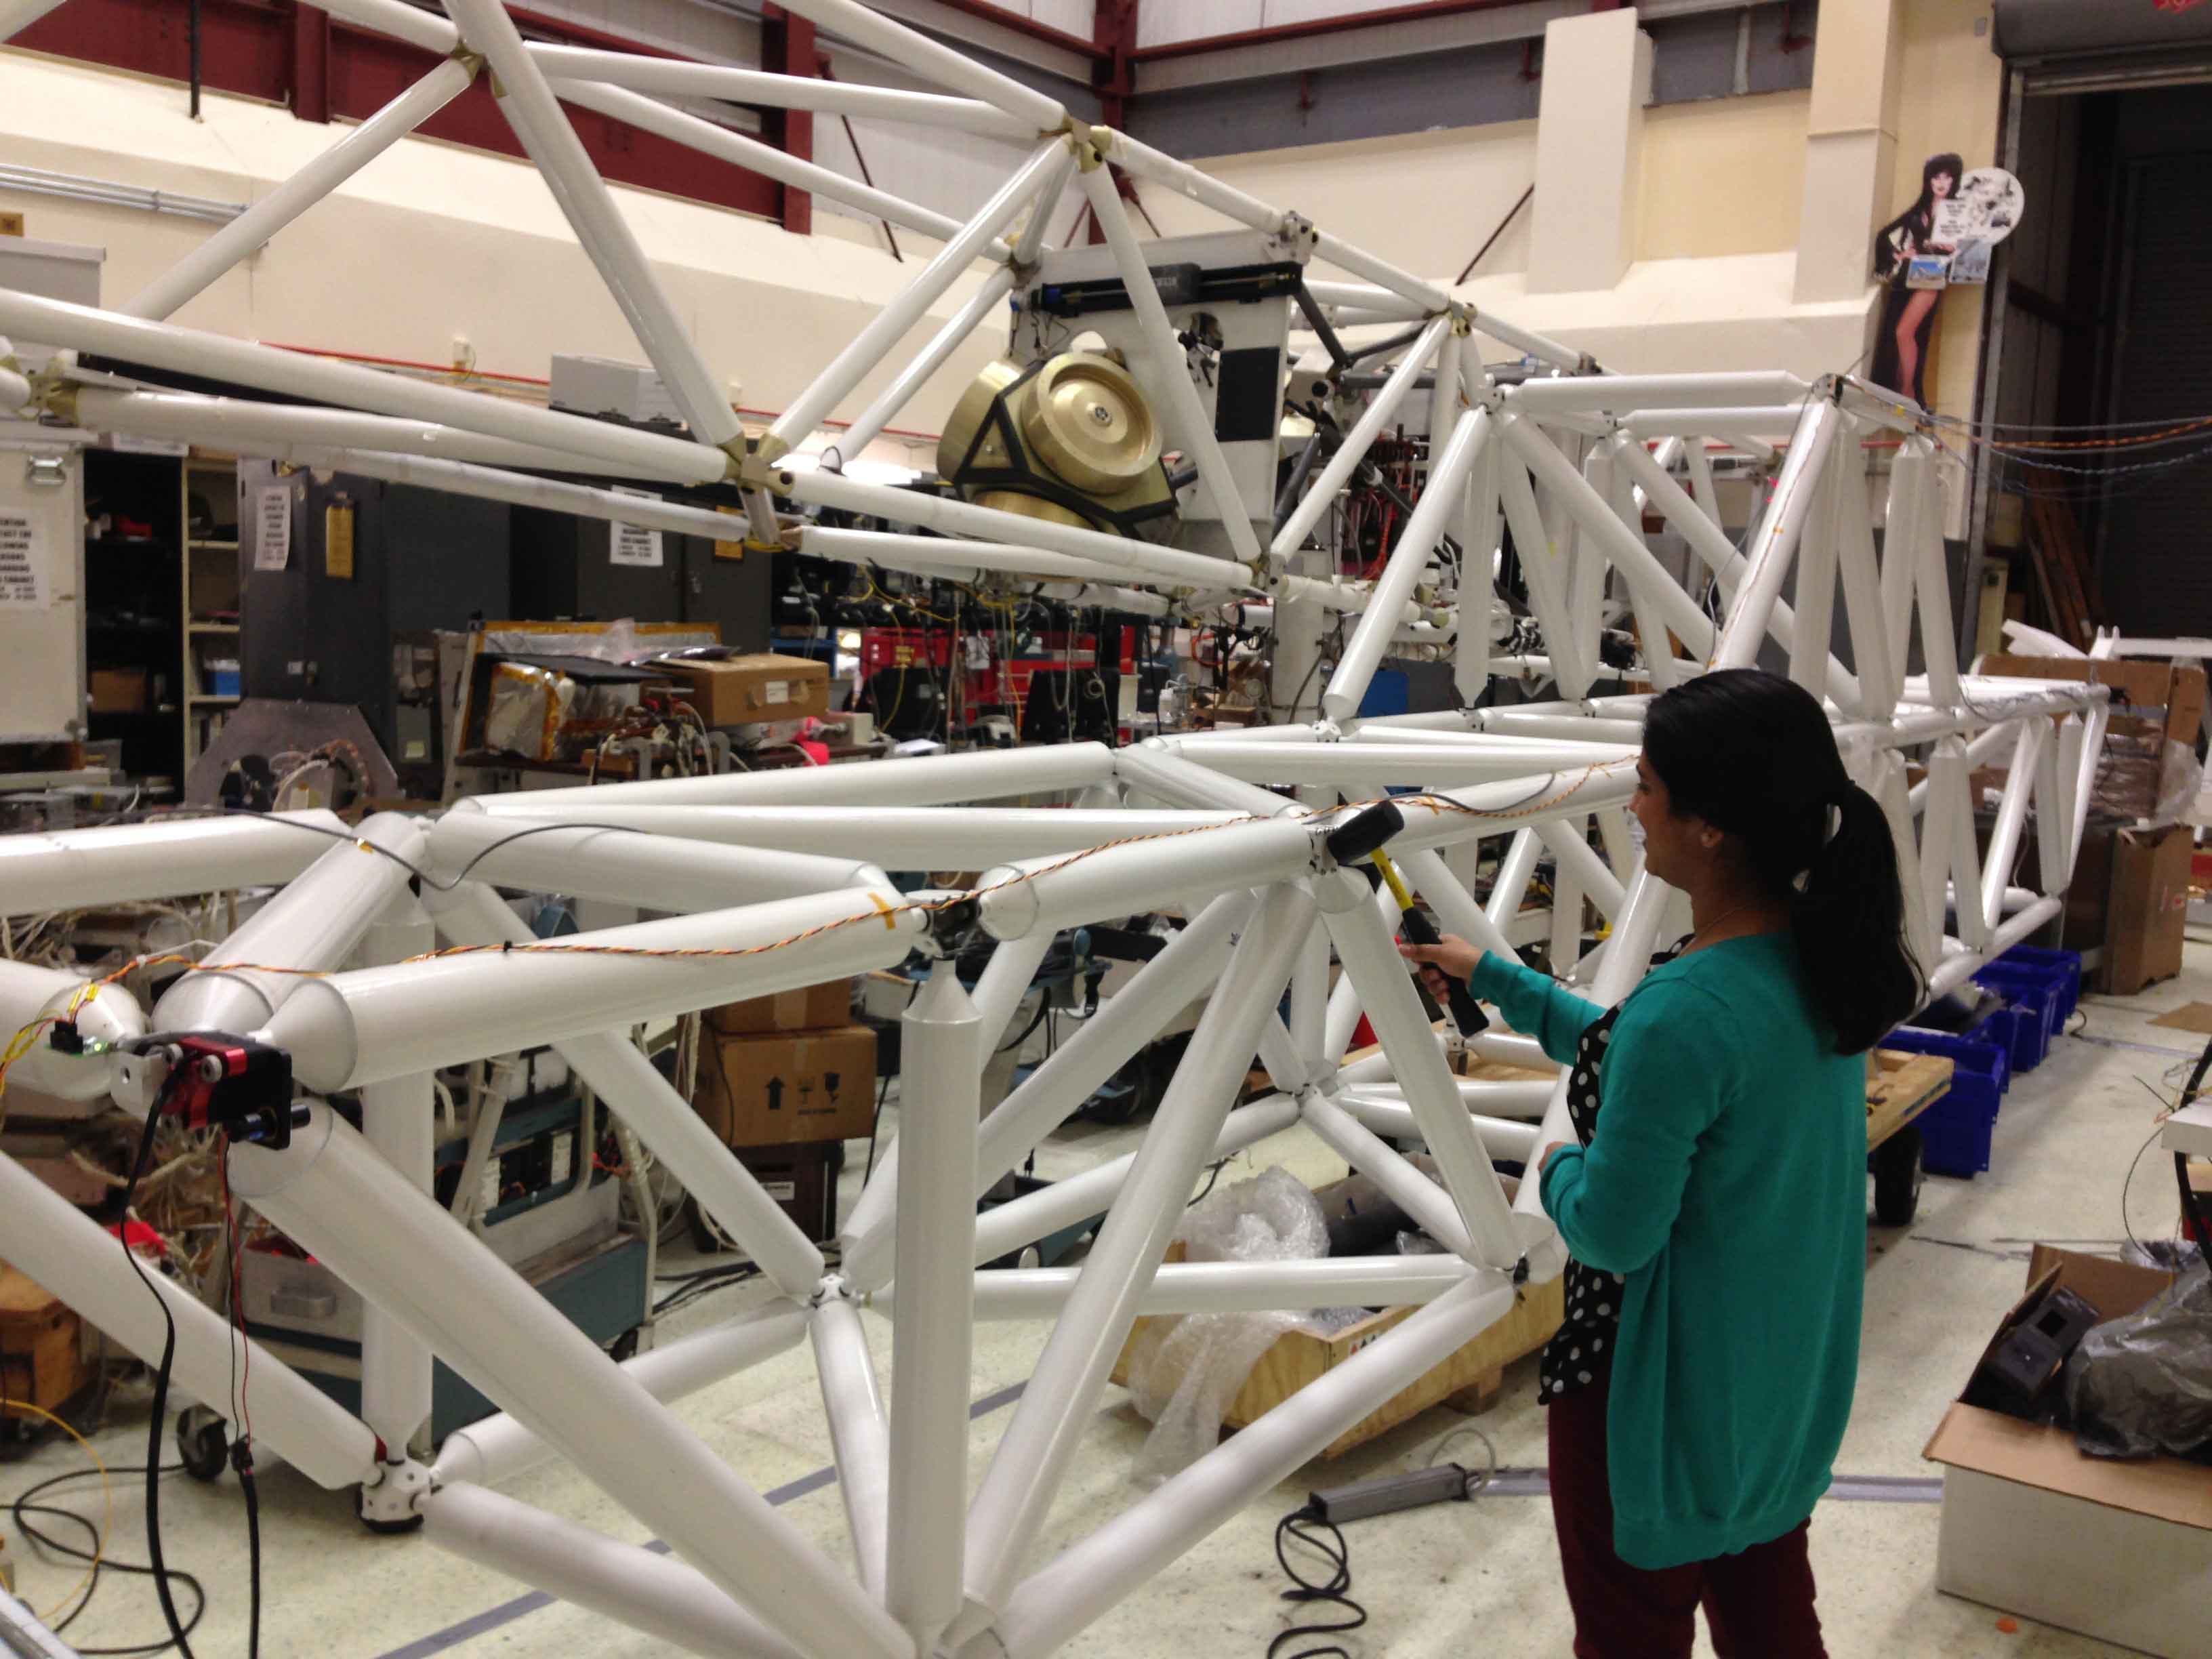 Sajeela studying the vibration modes in the structure by whacking it with a hammer and recording accelerometer responses